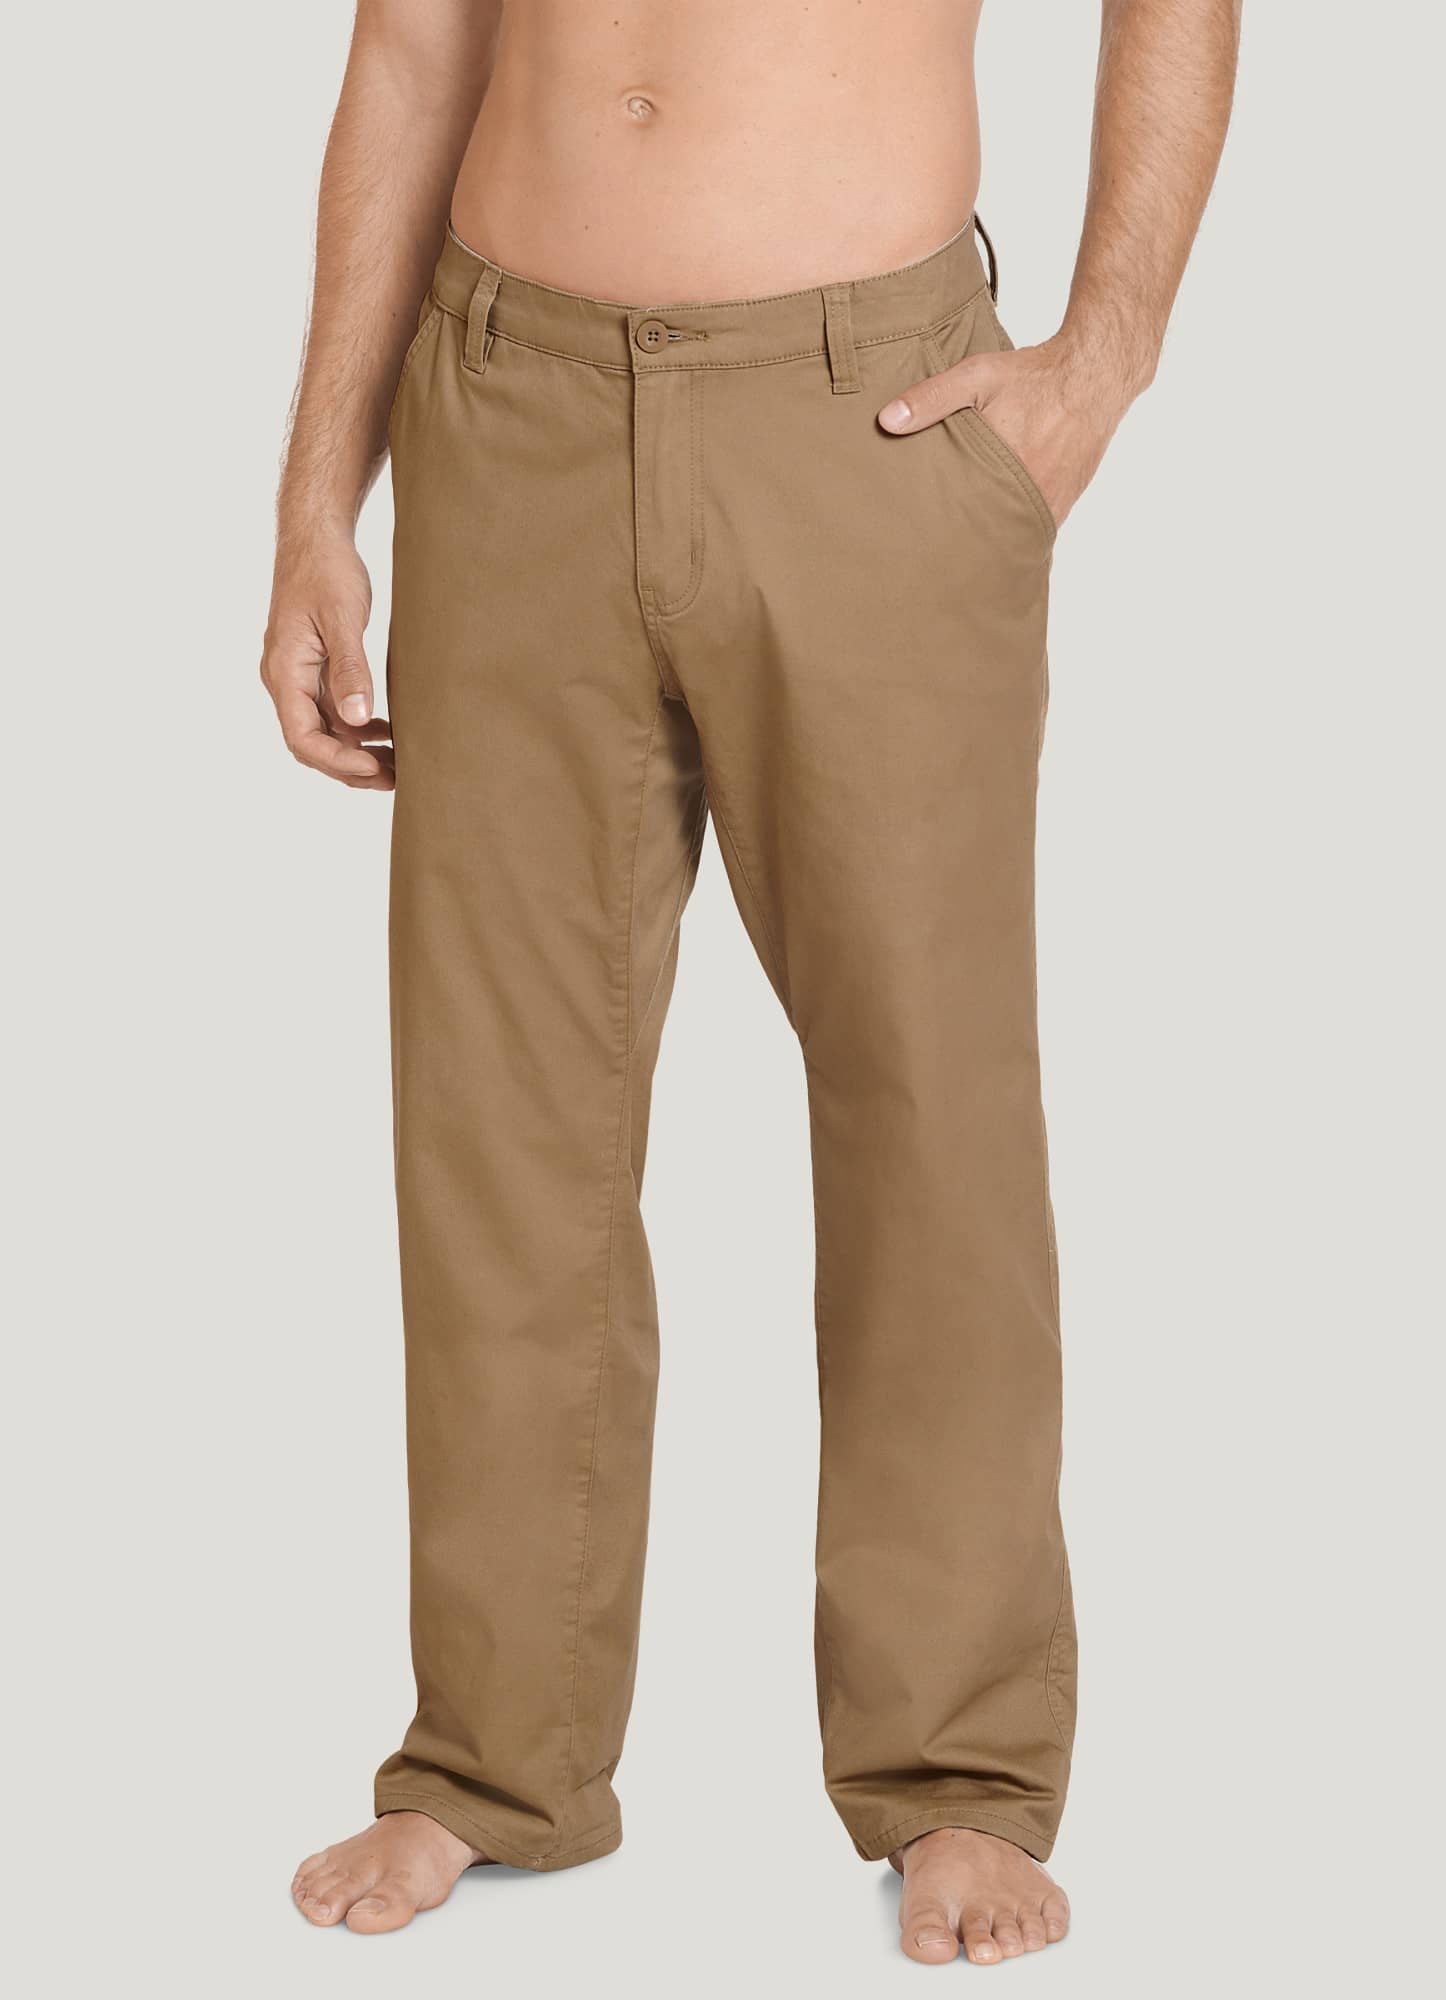 Jockey Outdoors™ Flannel Lined Pant